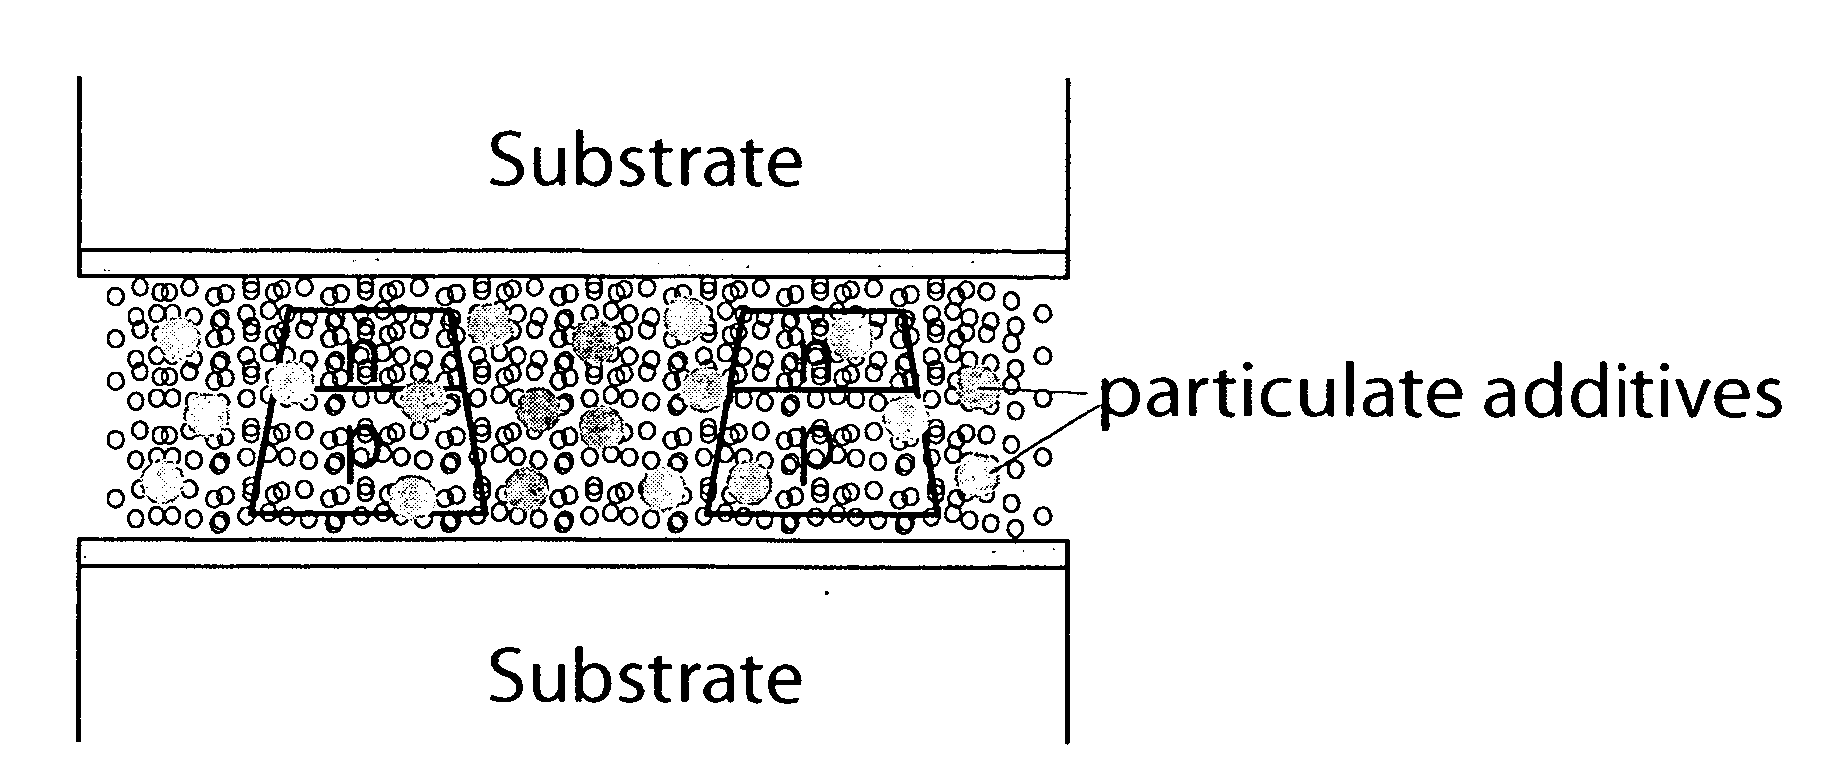 Solid state light sheet and encapsulated bare die semiconductor circuits